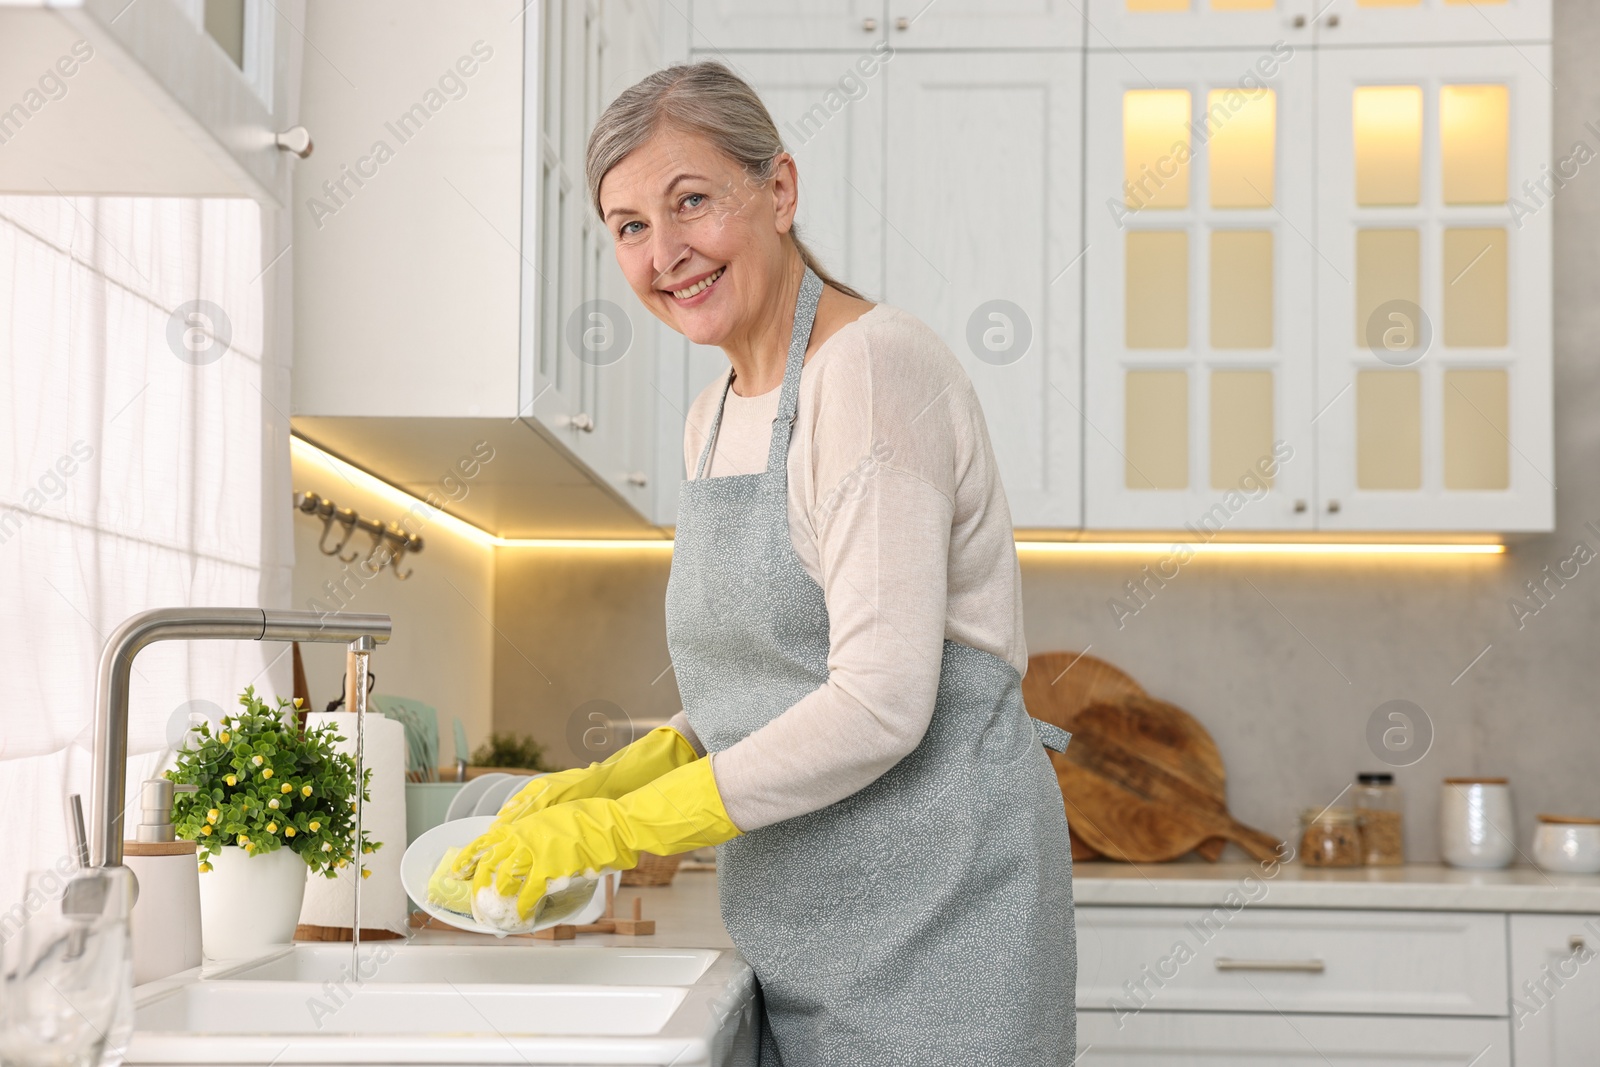 Photo of Happy housewife washing plate in kitchen sink